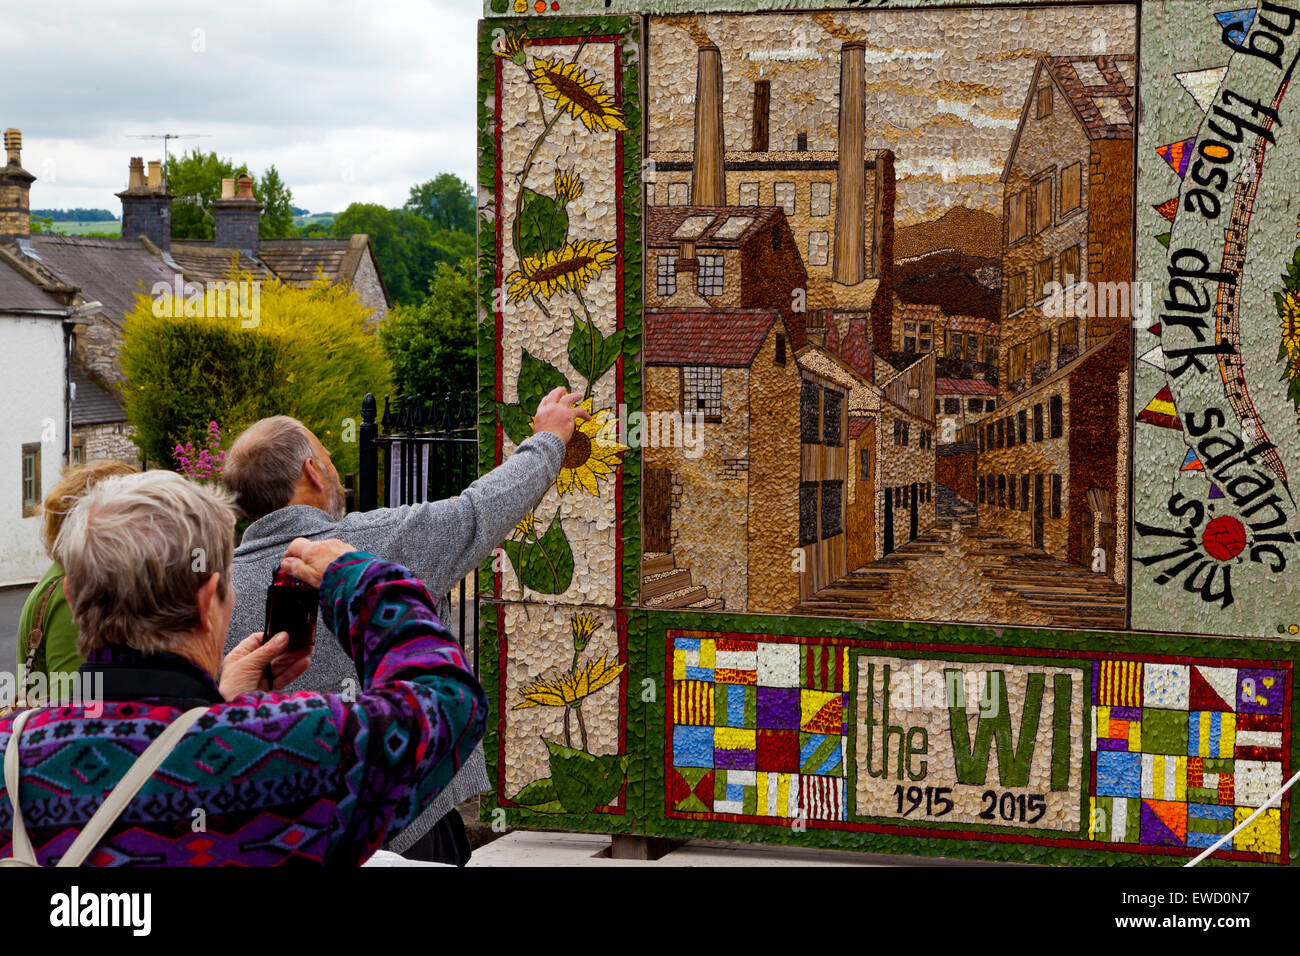 Well Dressing in Youlgreave Peak District Derbyshire England UK a local tradition where villages decorate wells to give thanks Stock Photo